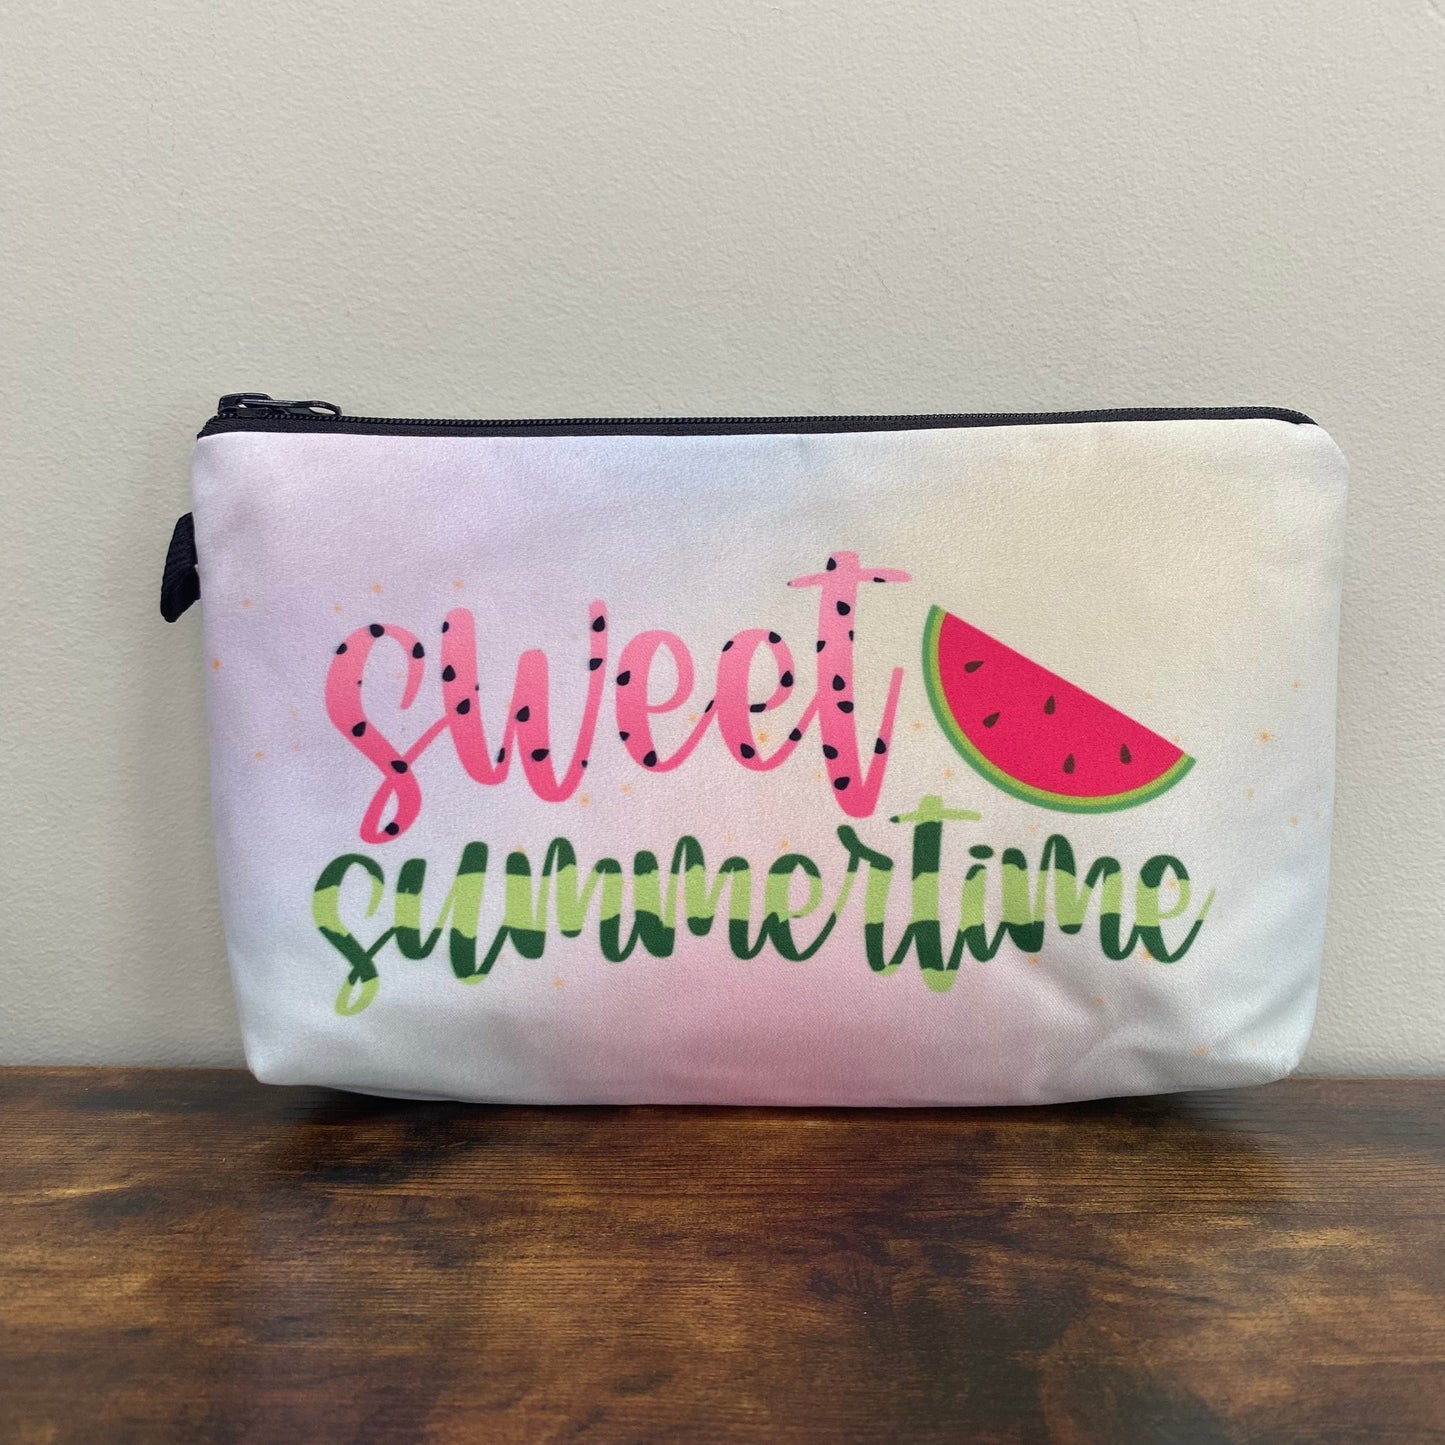 Sweet Summertime Watermelon - Water-Resistant Multi-Use Pouch